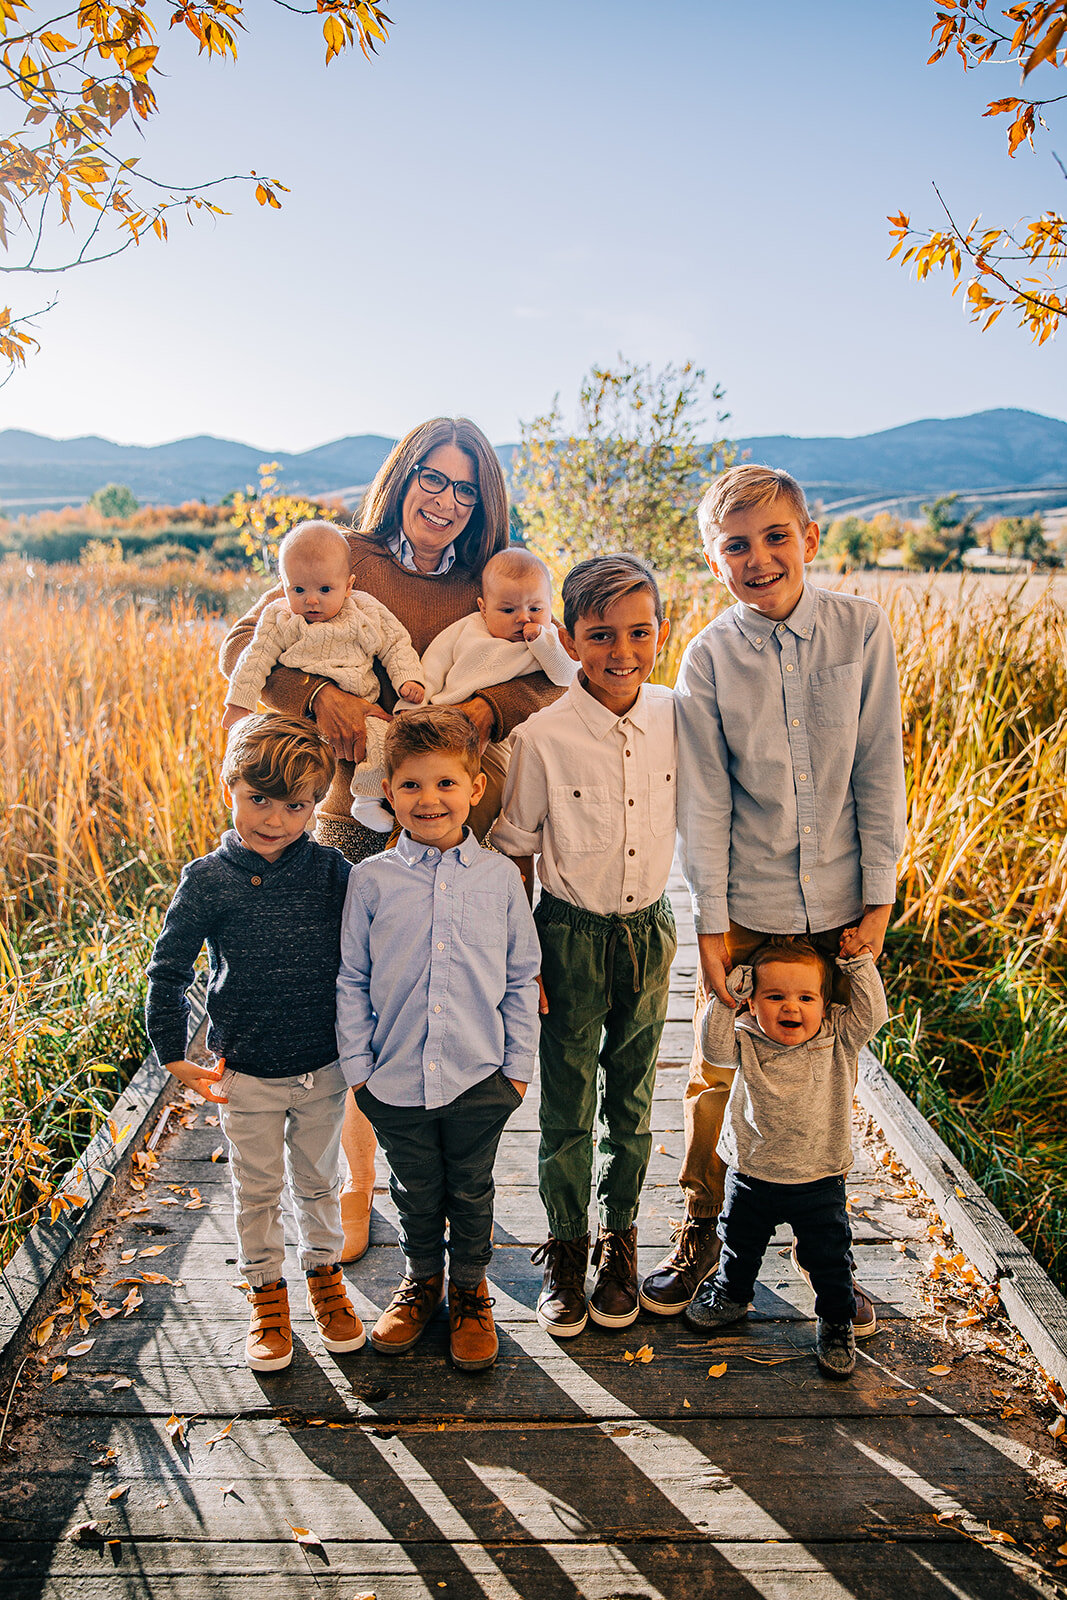  grandma with her grandsons grandkids boardwalk family pictures garden city park bear lake utah together again fields of gold mountains lakeside photos professional photographers in utah utah family photographers extended family siblings families are